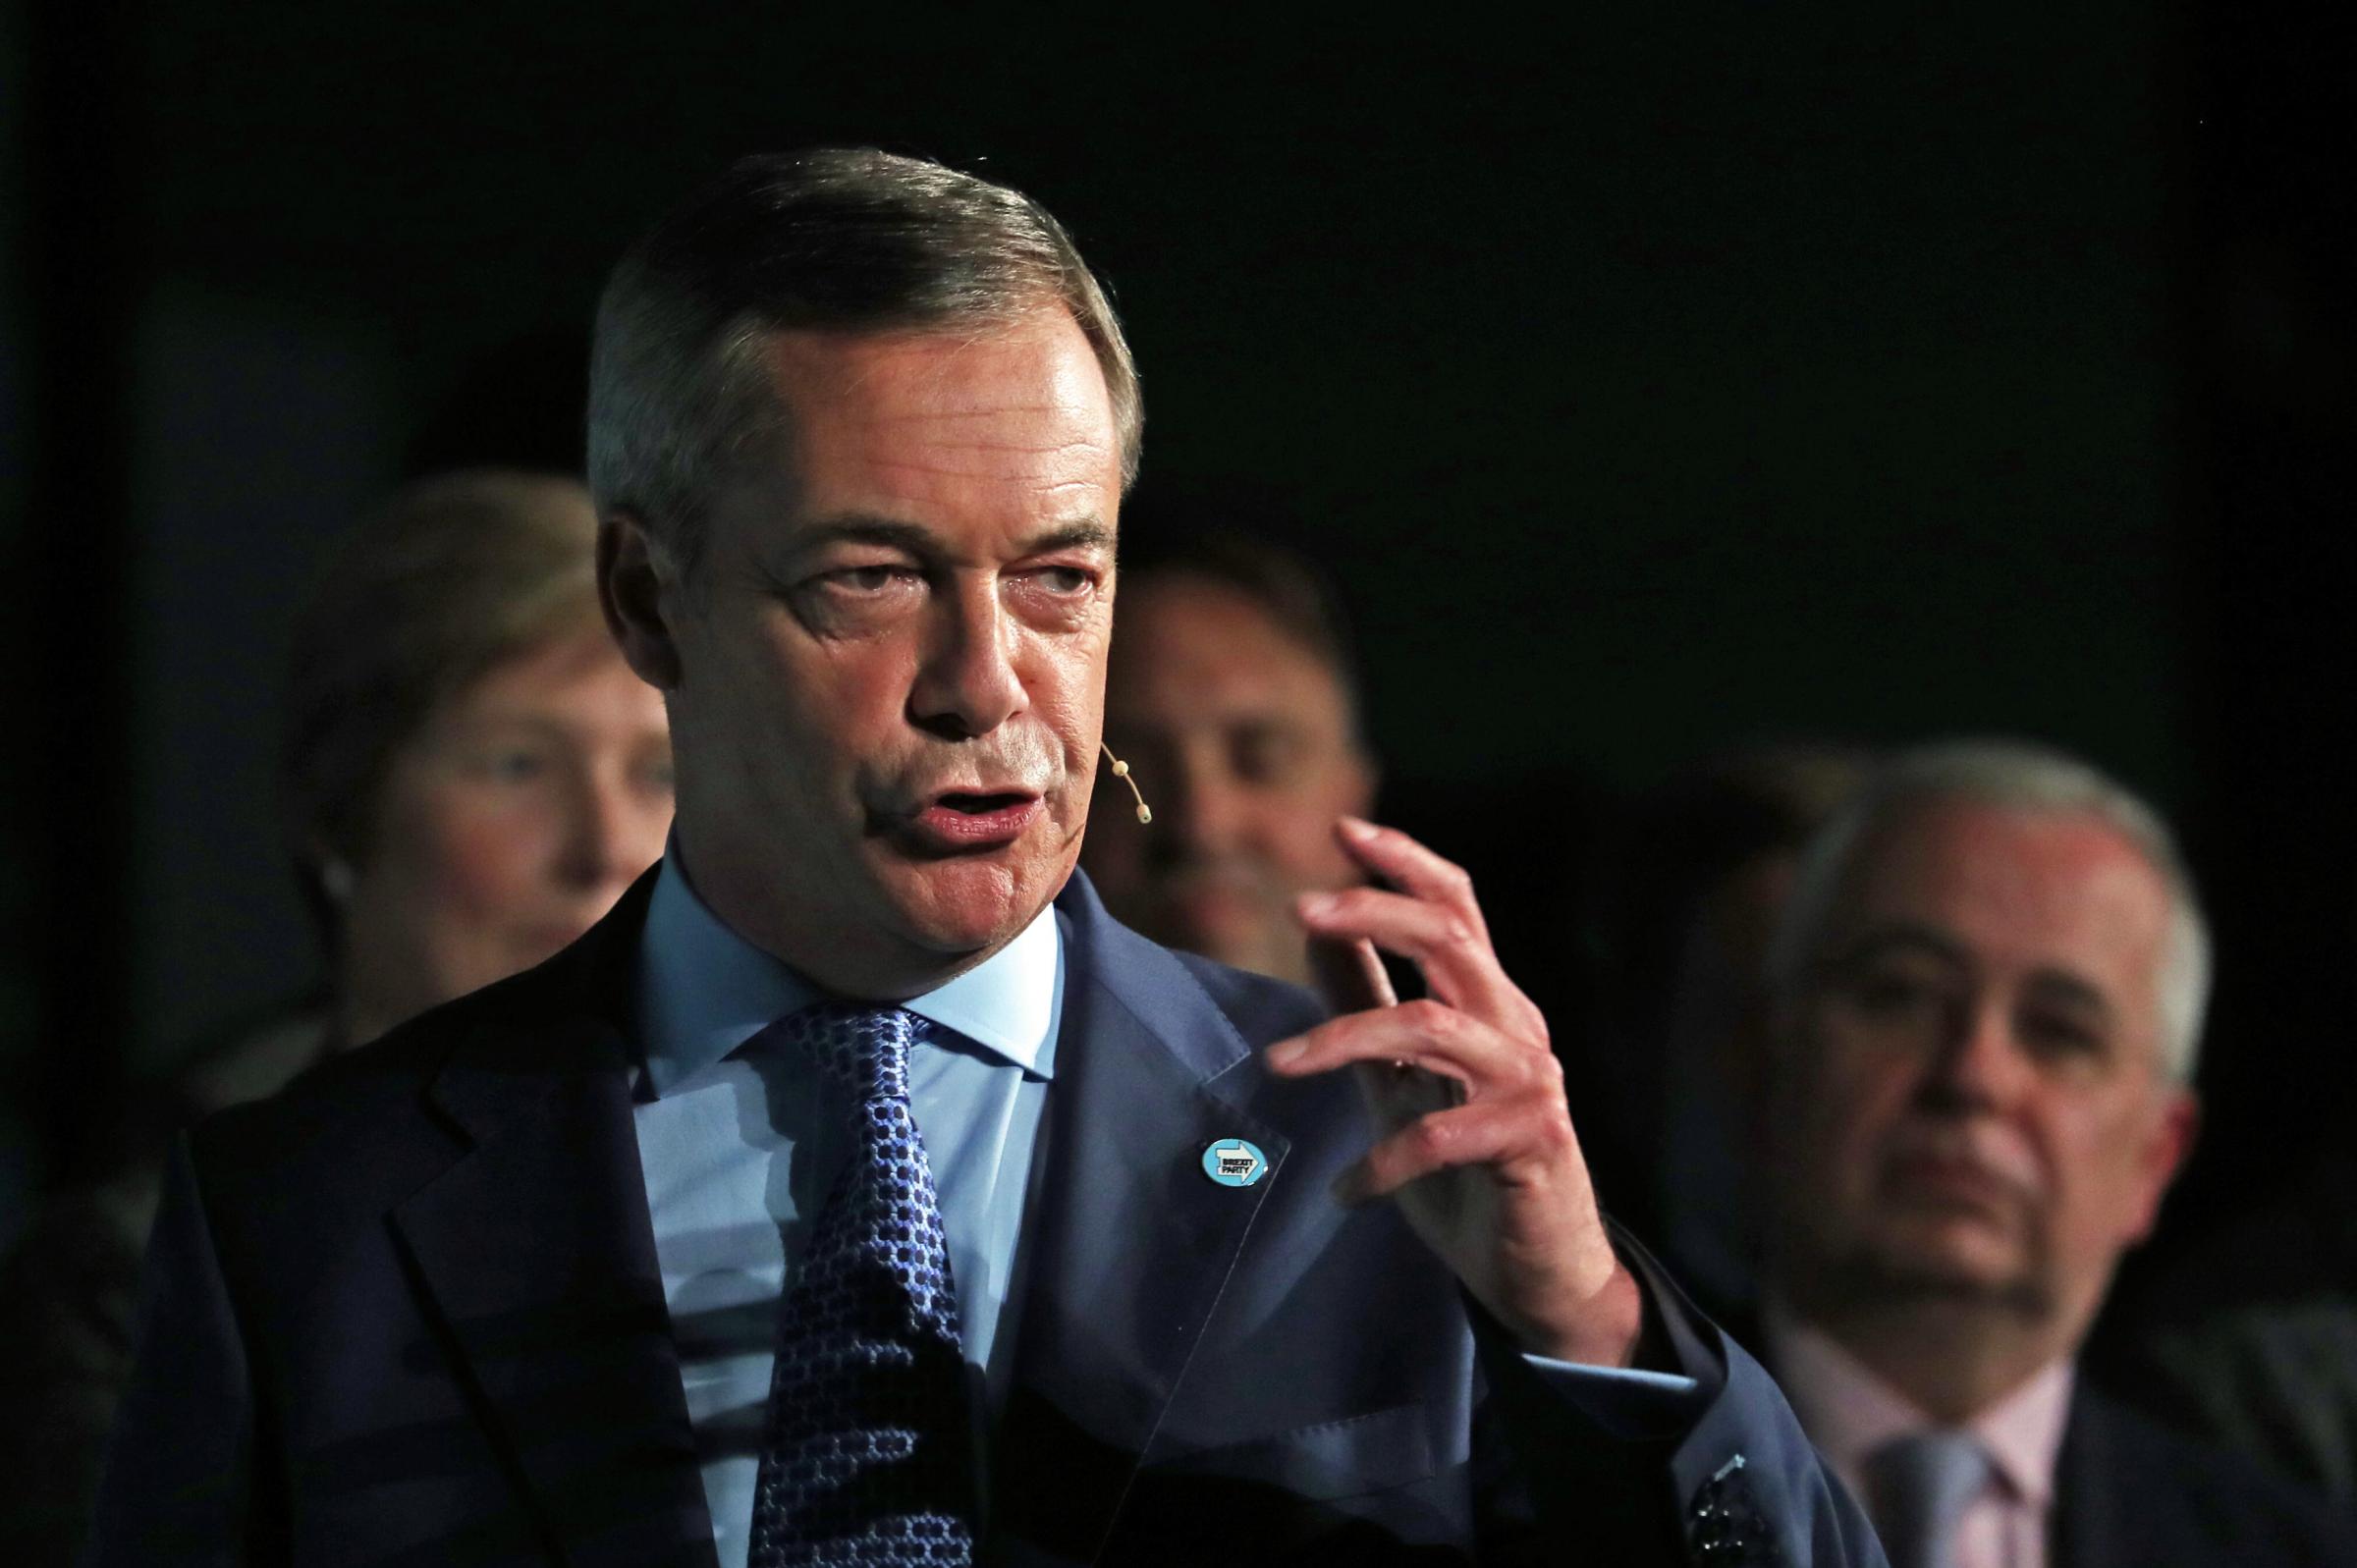 Letter: We don't need Farage's brand of rabble-rousing politics